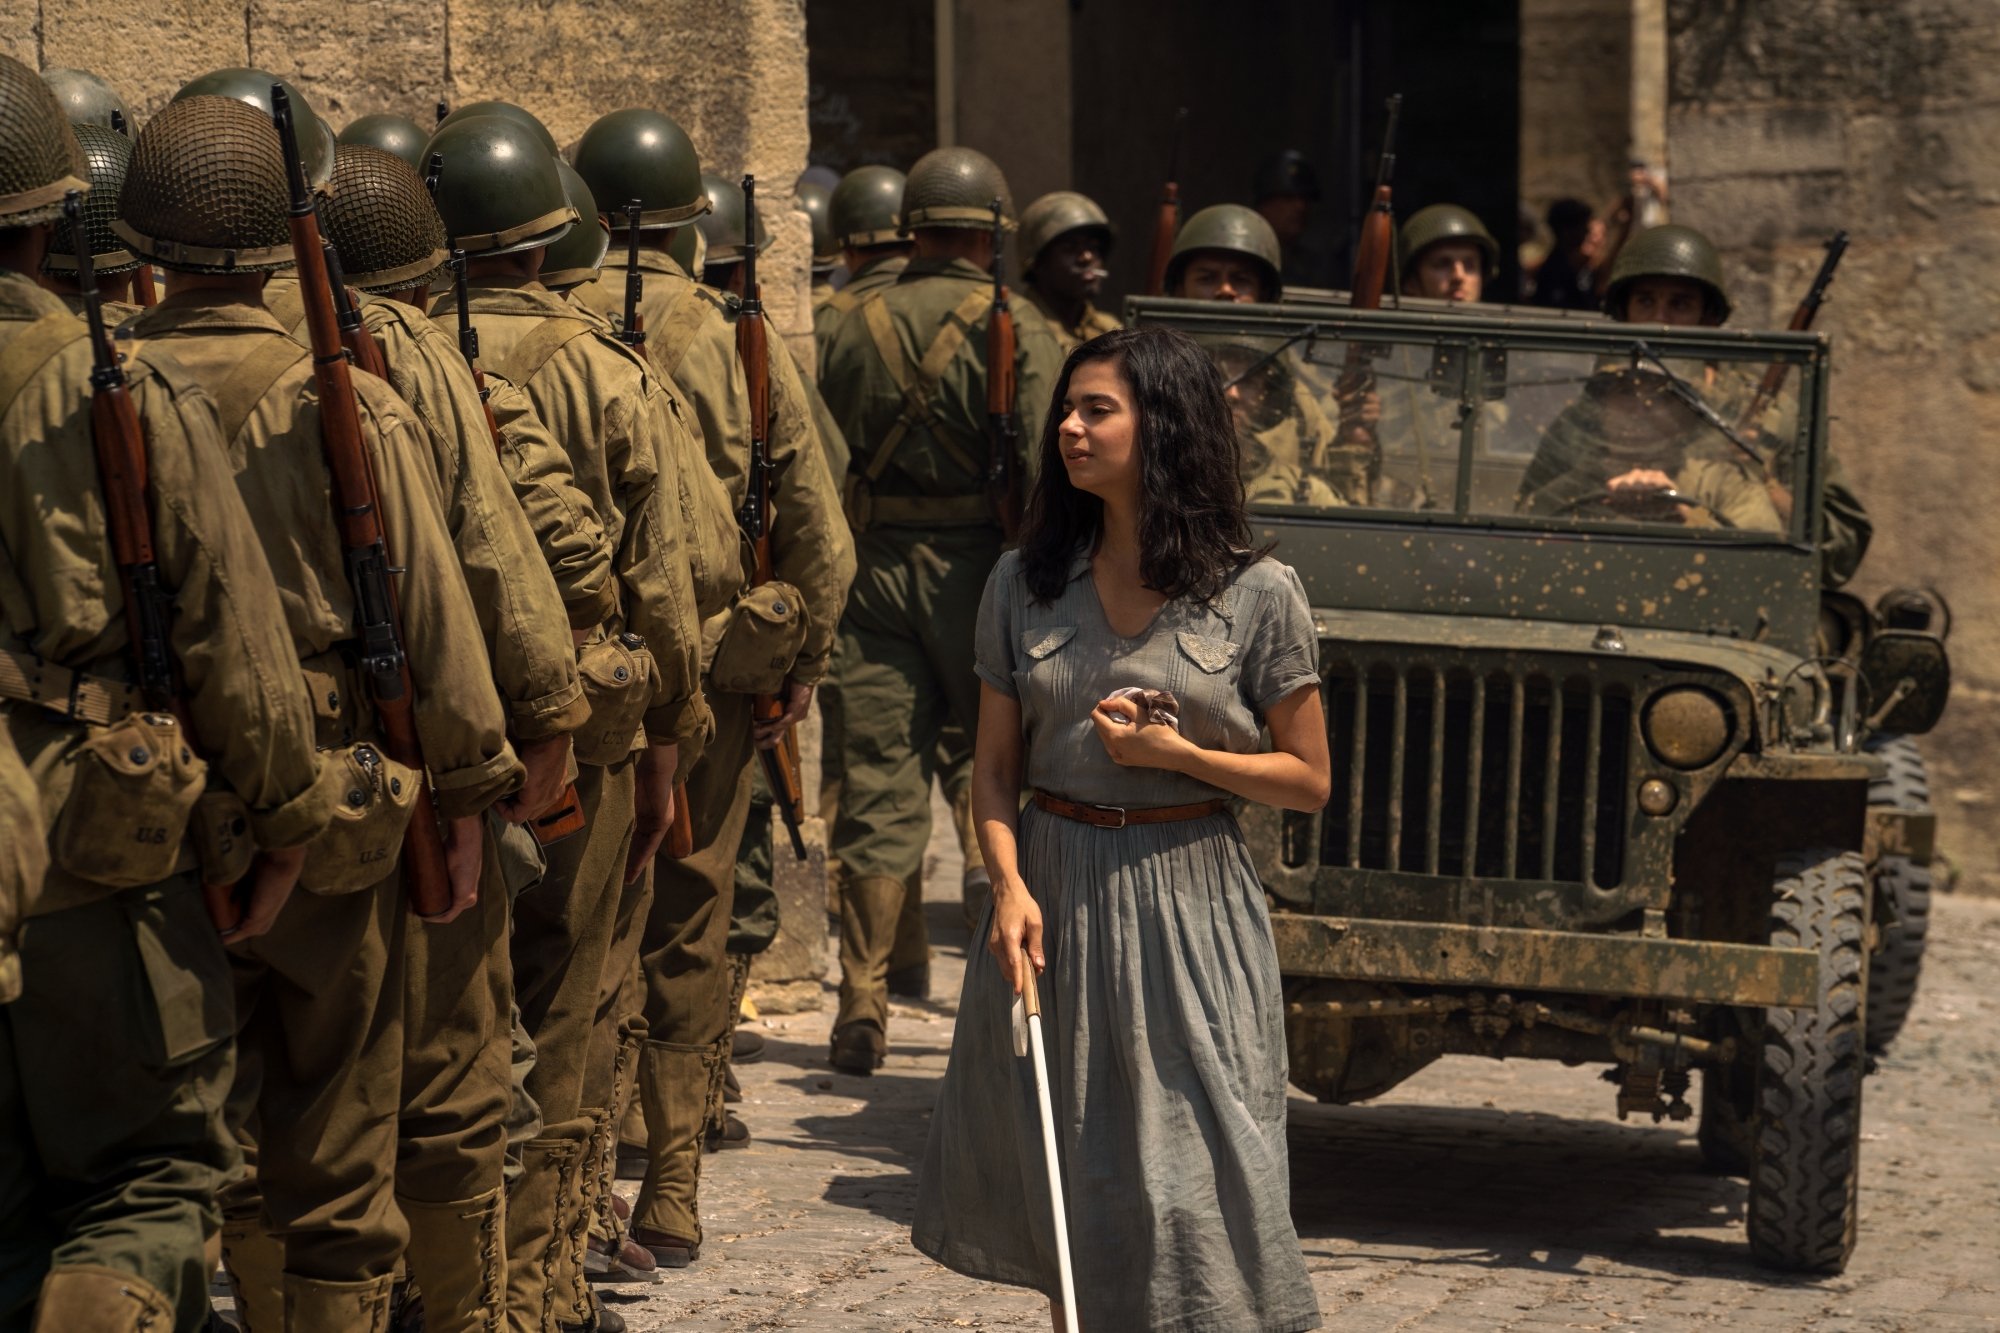 Loberti's character Marie-Laure walks by a line of soldiers and a military jeep. She appears in distress. 